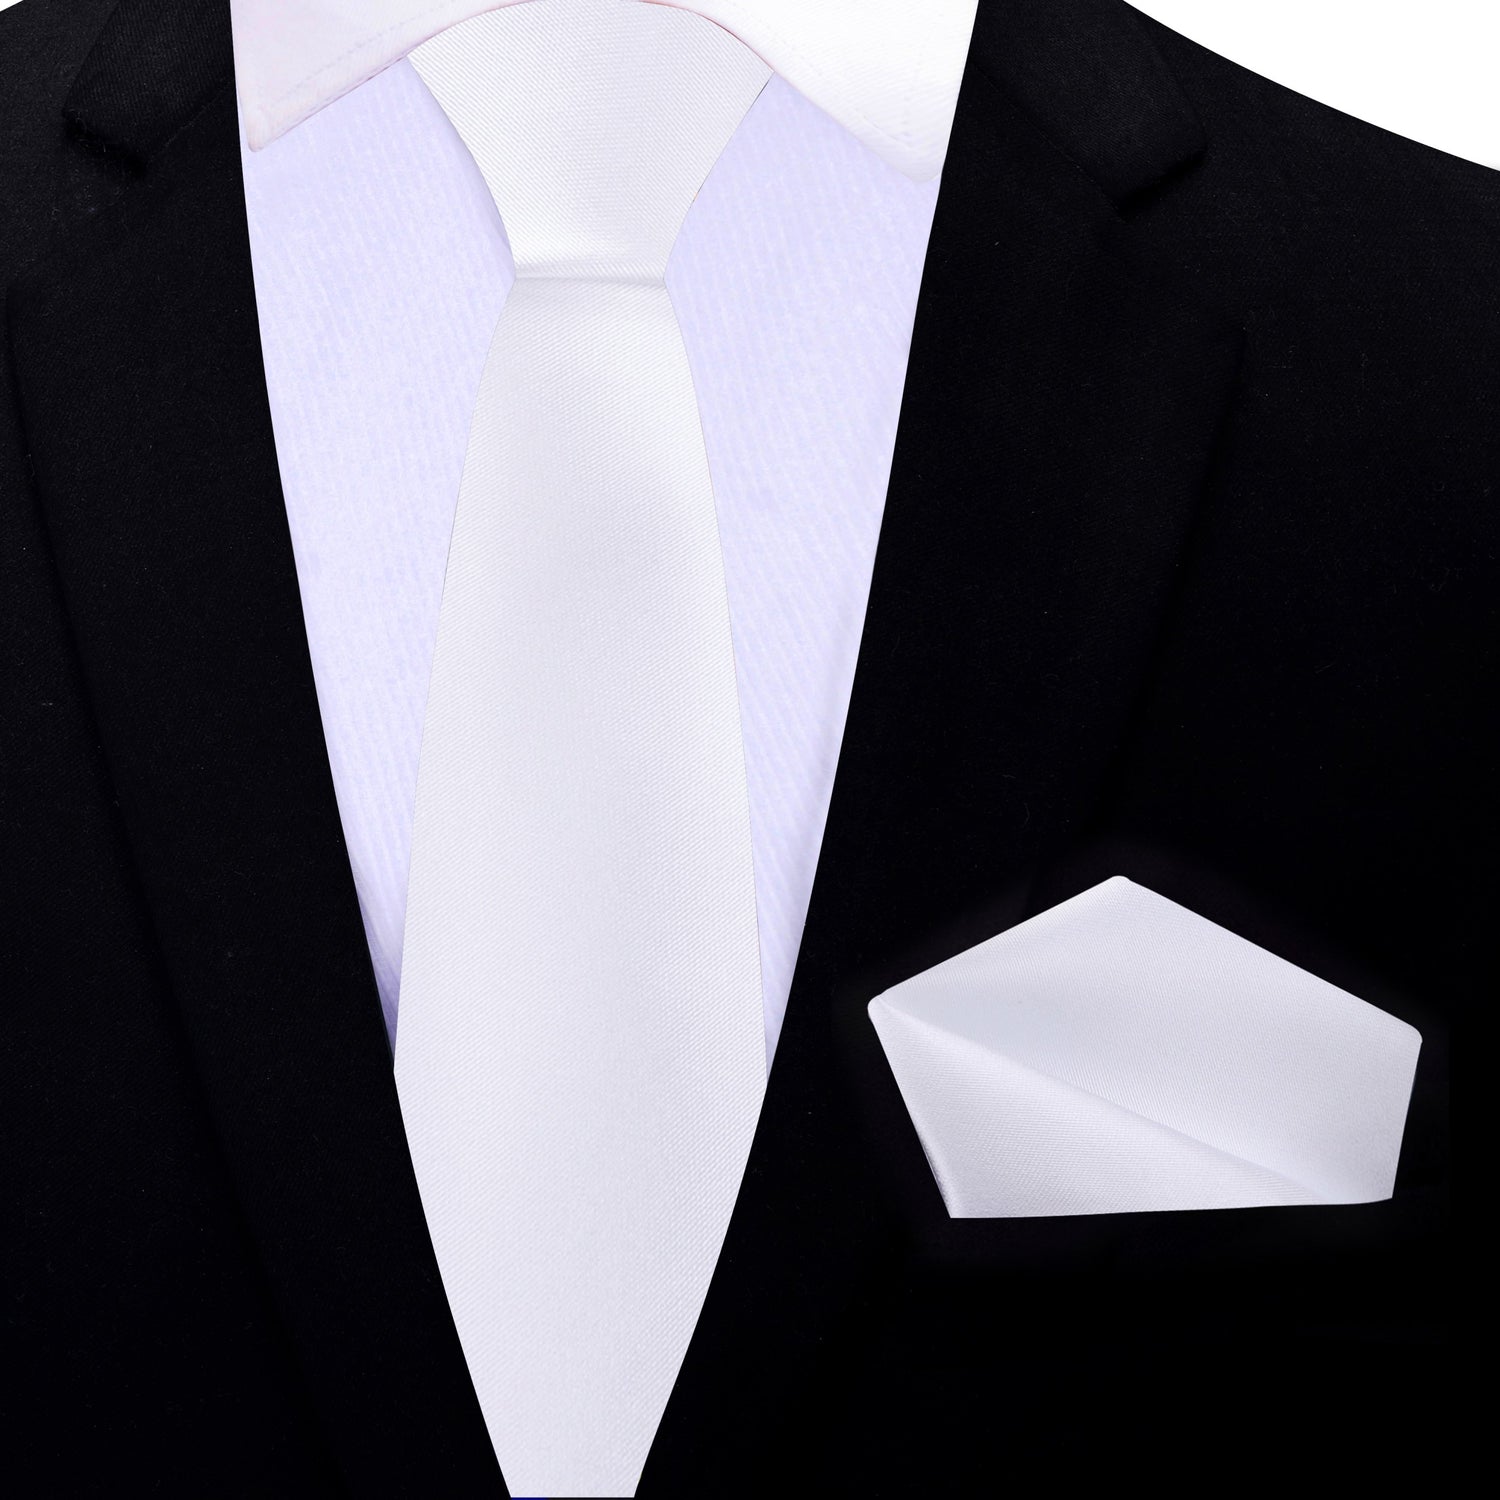 Thin Tie: Solid White Tie with Matching Square